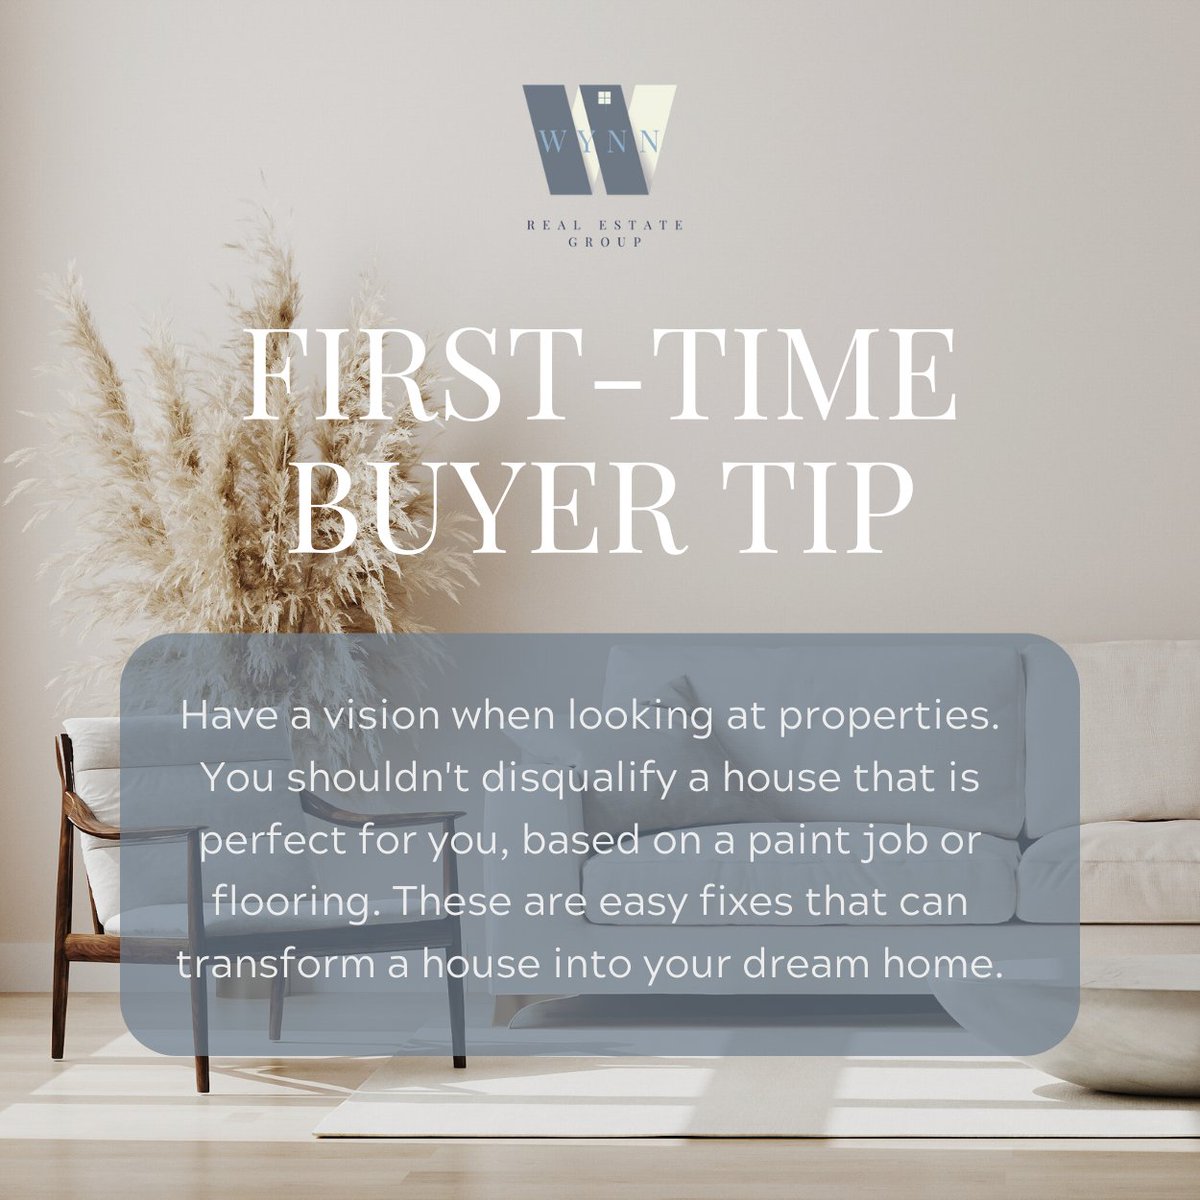 When house-hunting, focus your attention on the permanent details such as location and layout. These are key elements that either cannot be changed or will be expensive to modify.